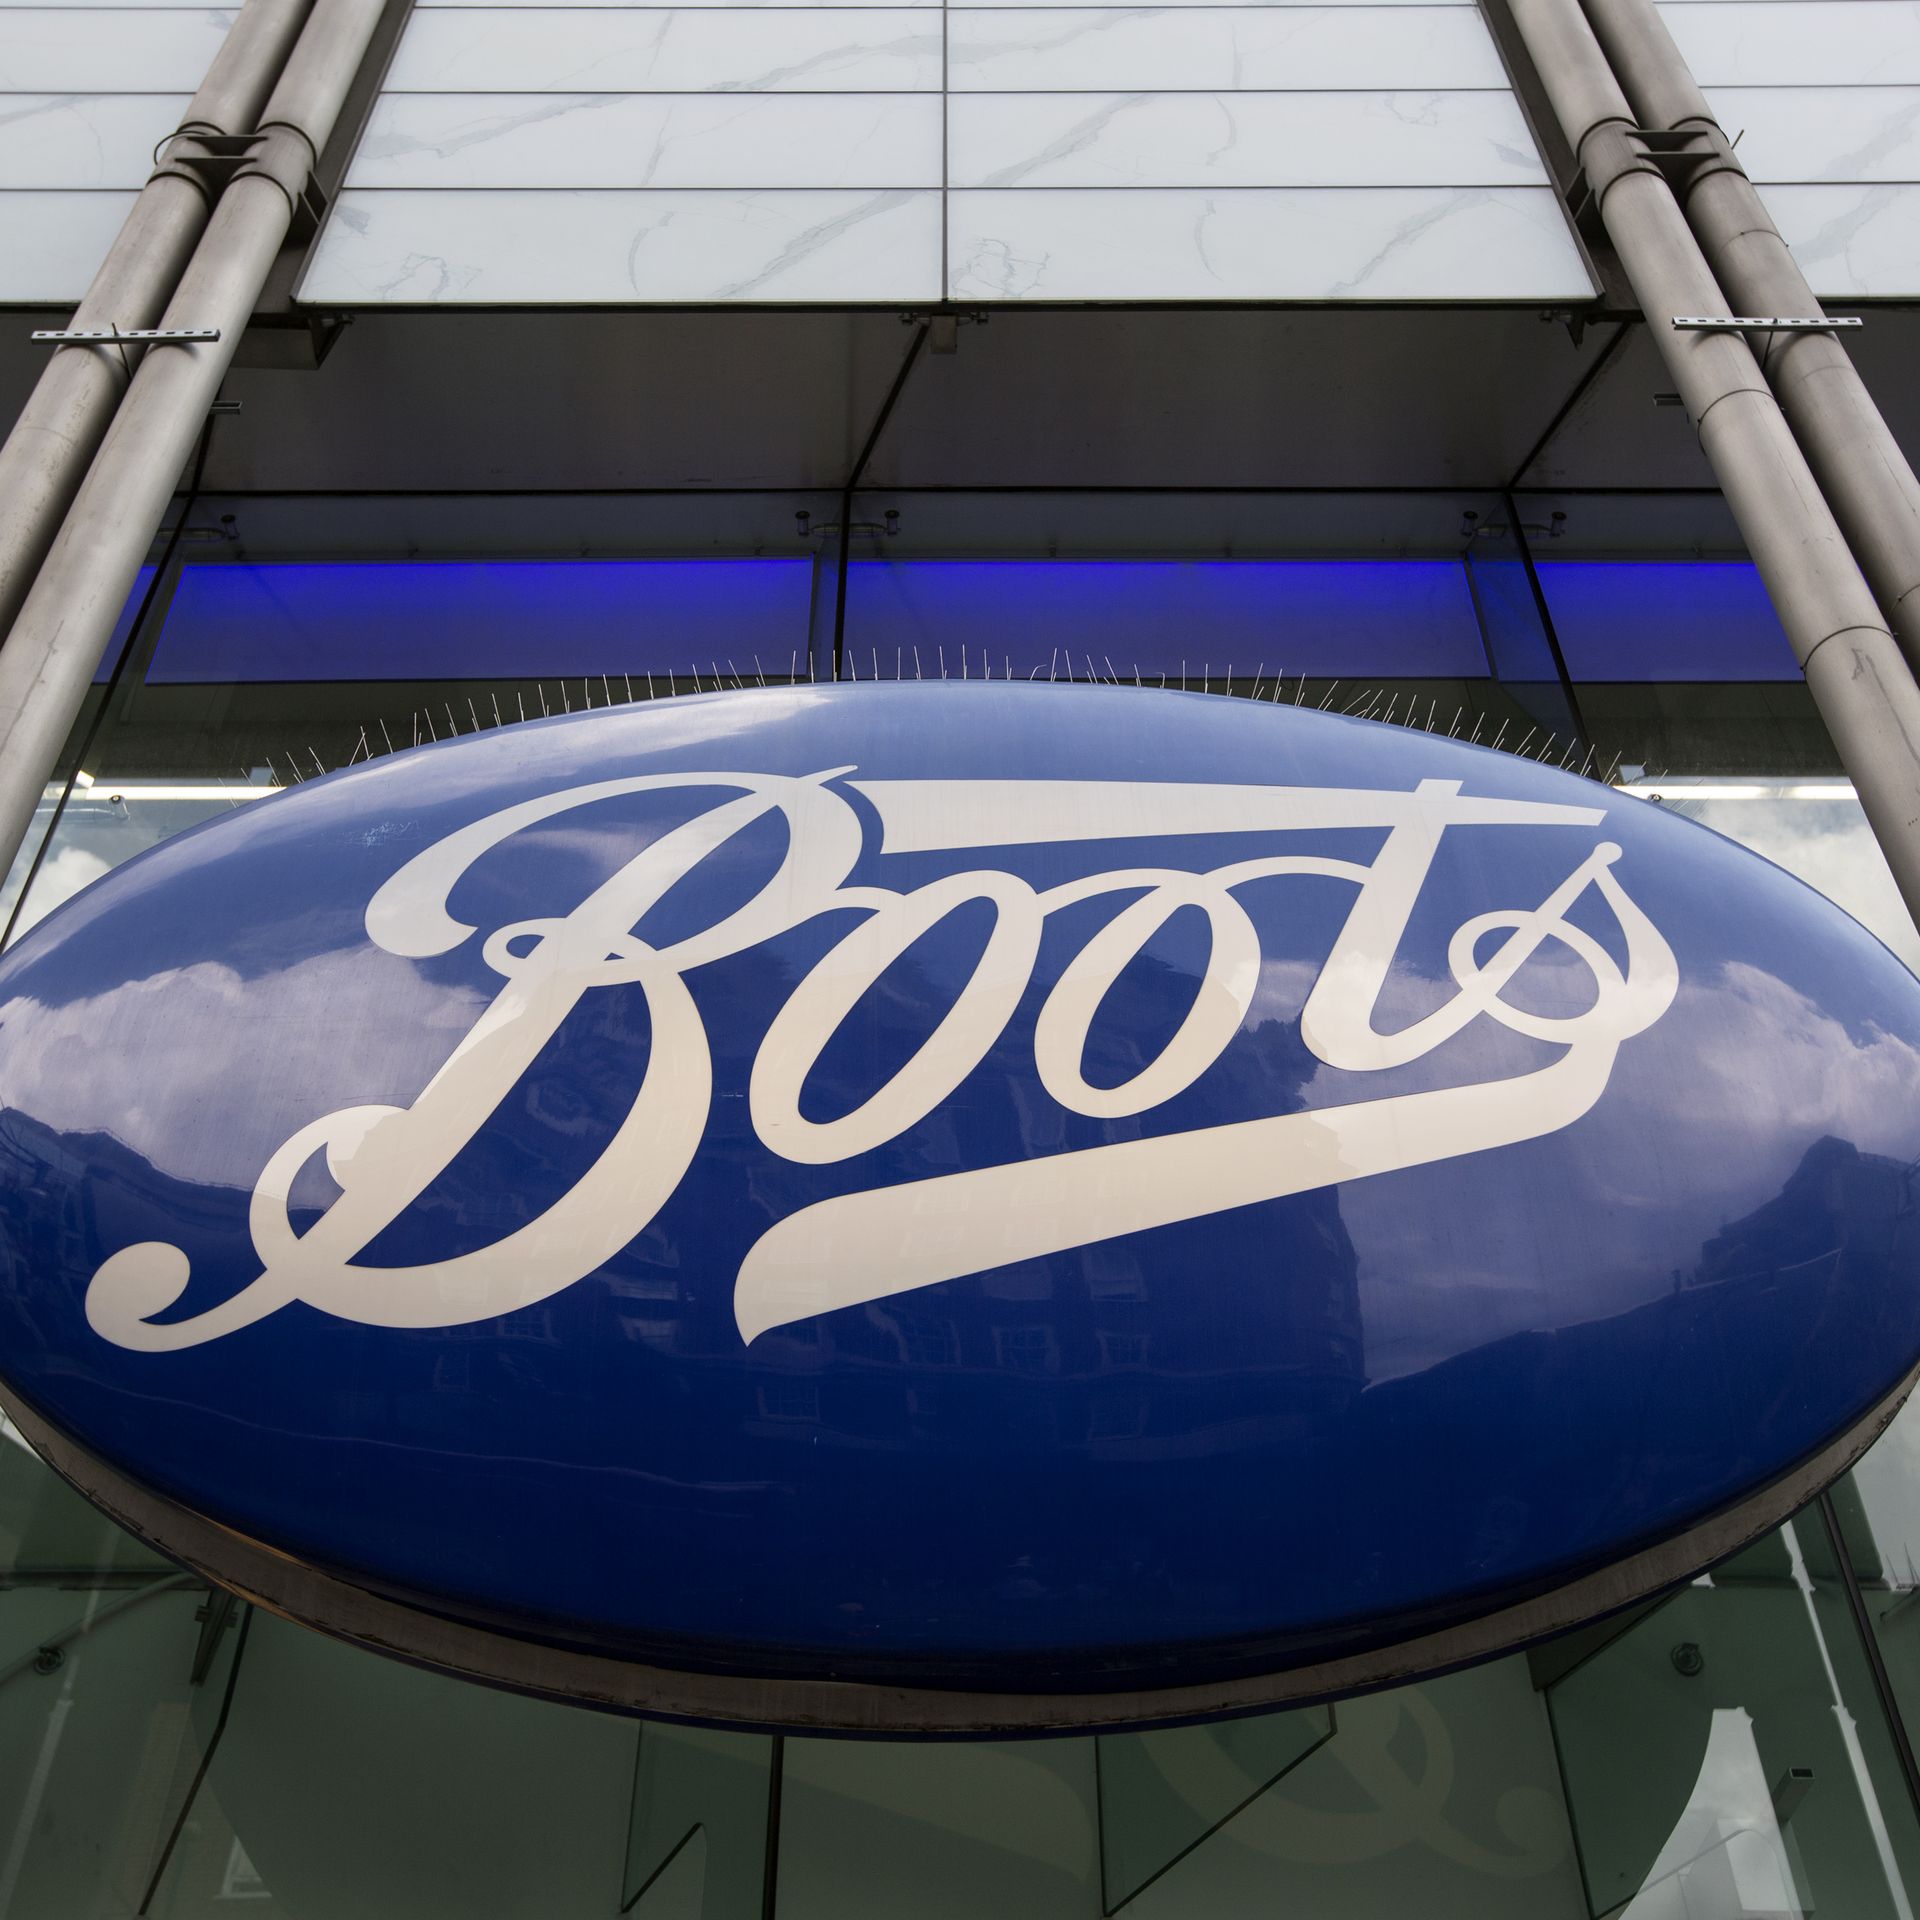 An oval sign, featuring the pharmacy chain Boots' name spelled out in white lettering on a blue background, hangs off the side of a glass-covered building.